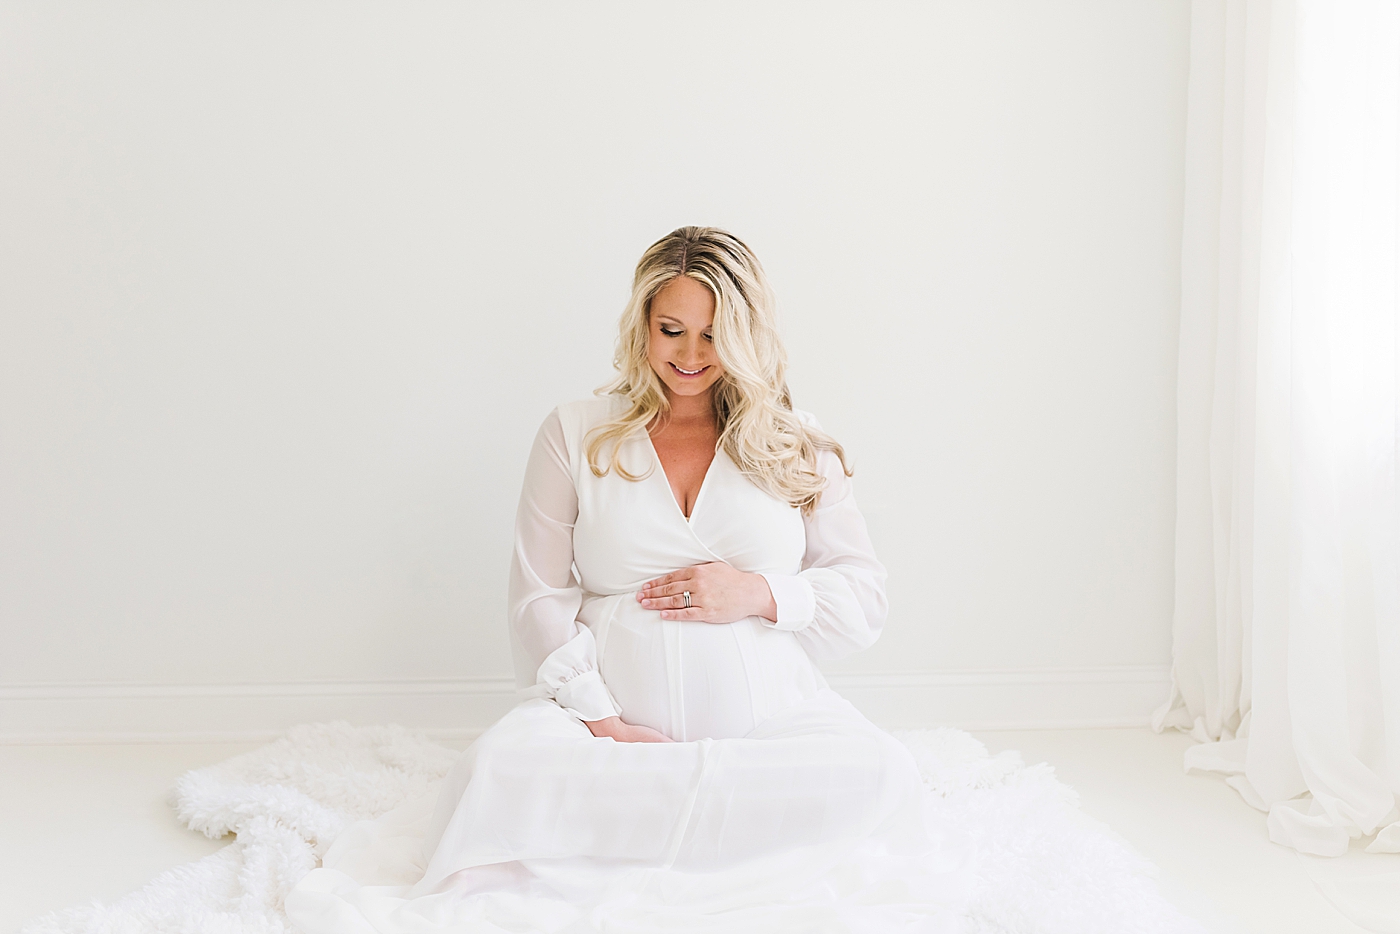 Pregnant woman in white dress sitting on the floor | Photo by Huntersville Newborn Photographer Anna Wisjo 